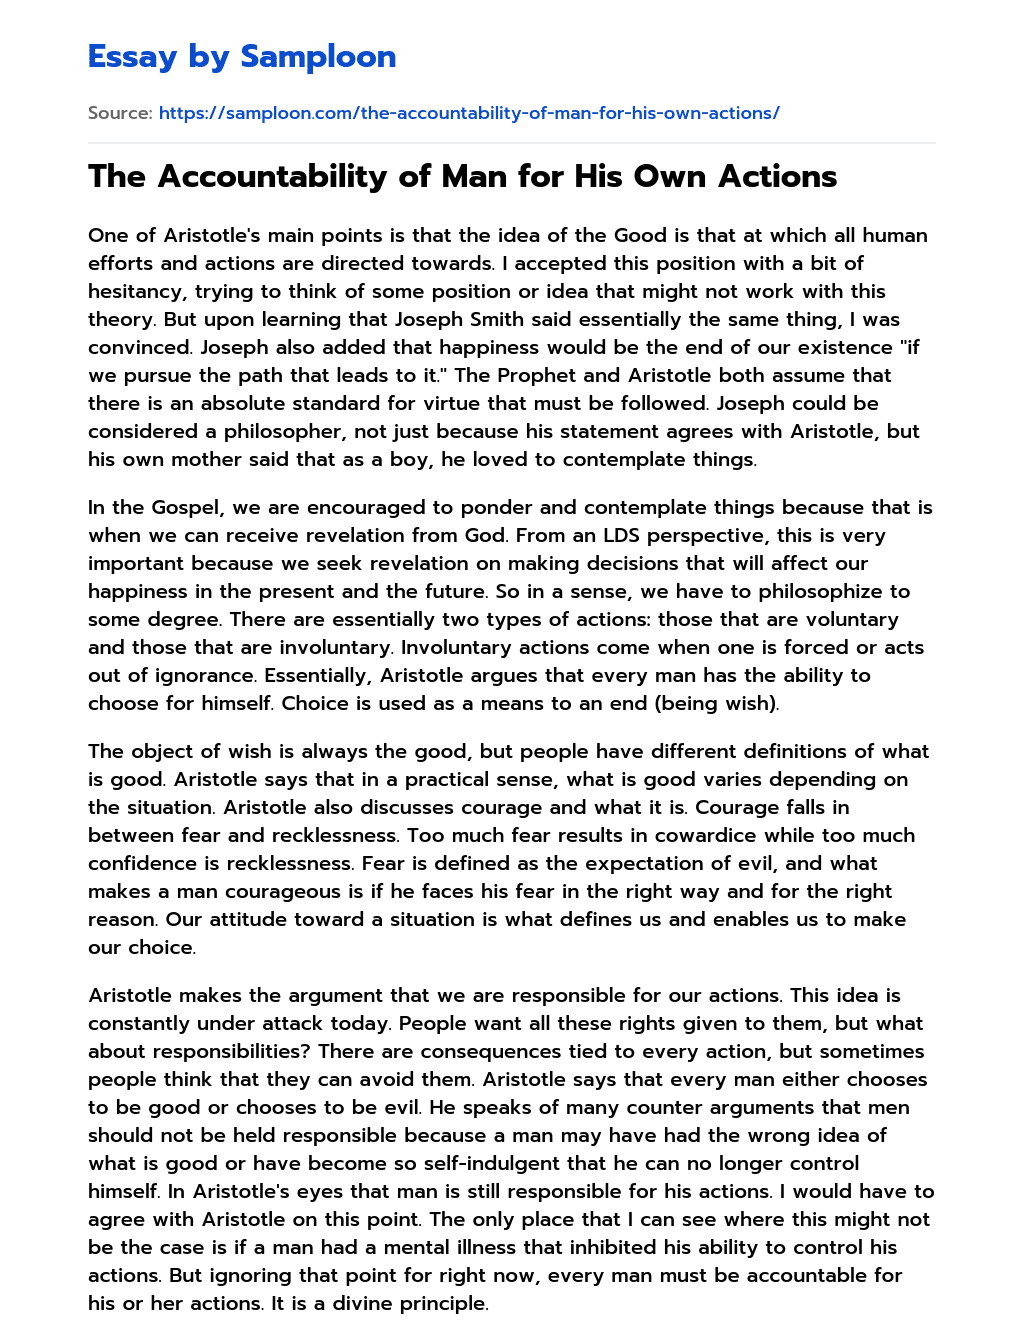 The Accountability of Man for His Own Actions essay